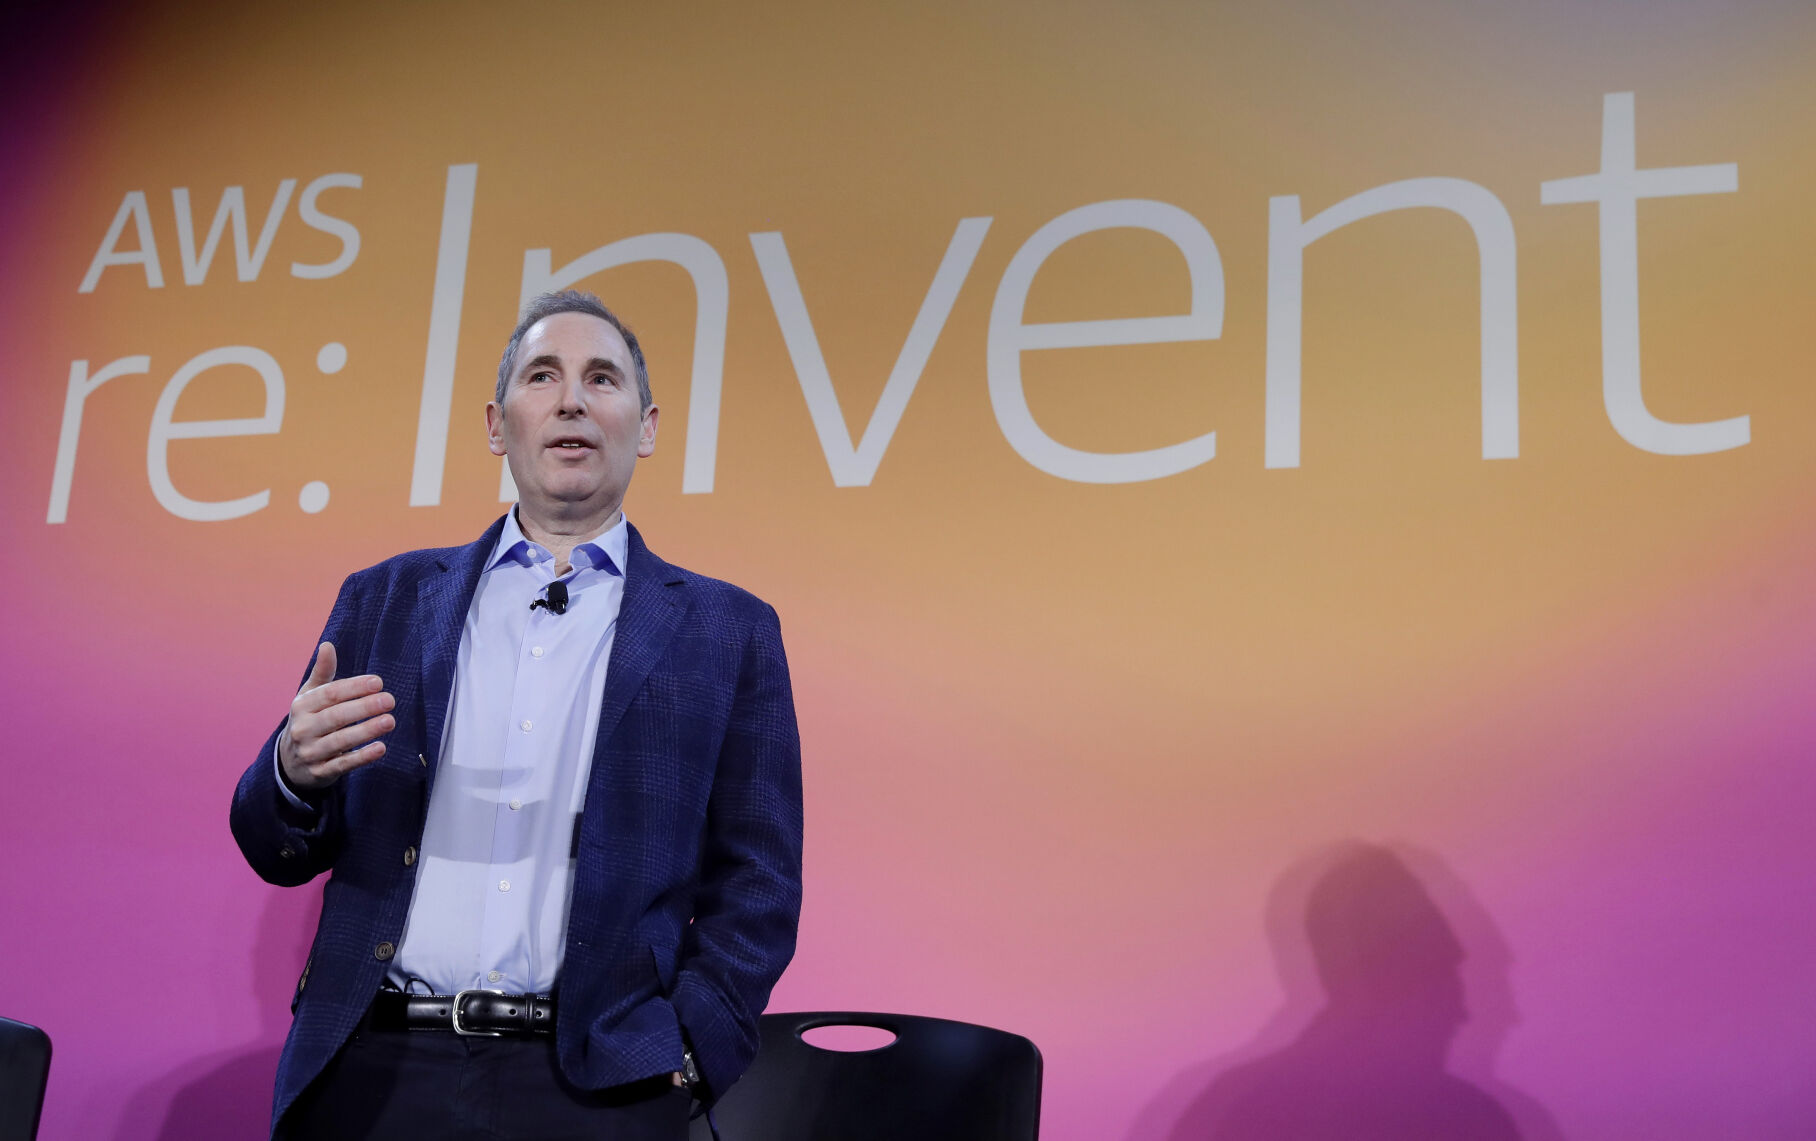 <p>FILE - AWS CEO Andy Jassy speaks in Las Vegas, on Dec. 5, 2019. Amazon employees have been pushing back against the company’s return to office policy for months - and it seems Jassy has had enough. During a pre-recorded internal Q&A session earlier this month, Jassy told employees it was “past the time to disagree and commit” with the policy, which requires corporate employees to be in the office three days a week. (Isaac Brekken/AP Images for NFL, File)</p>   PHOTO CREDIT: Isaac Brekken 